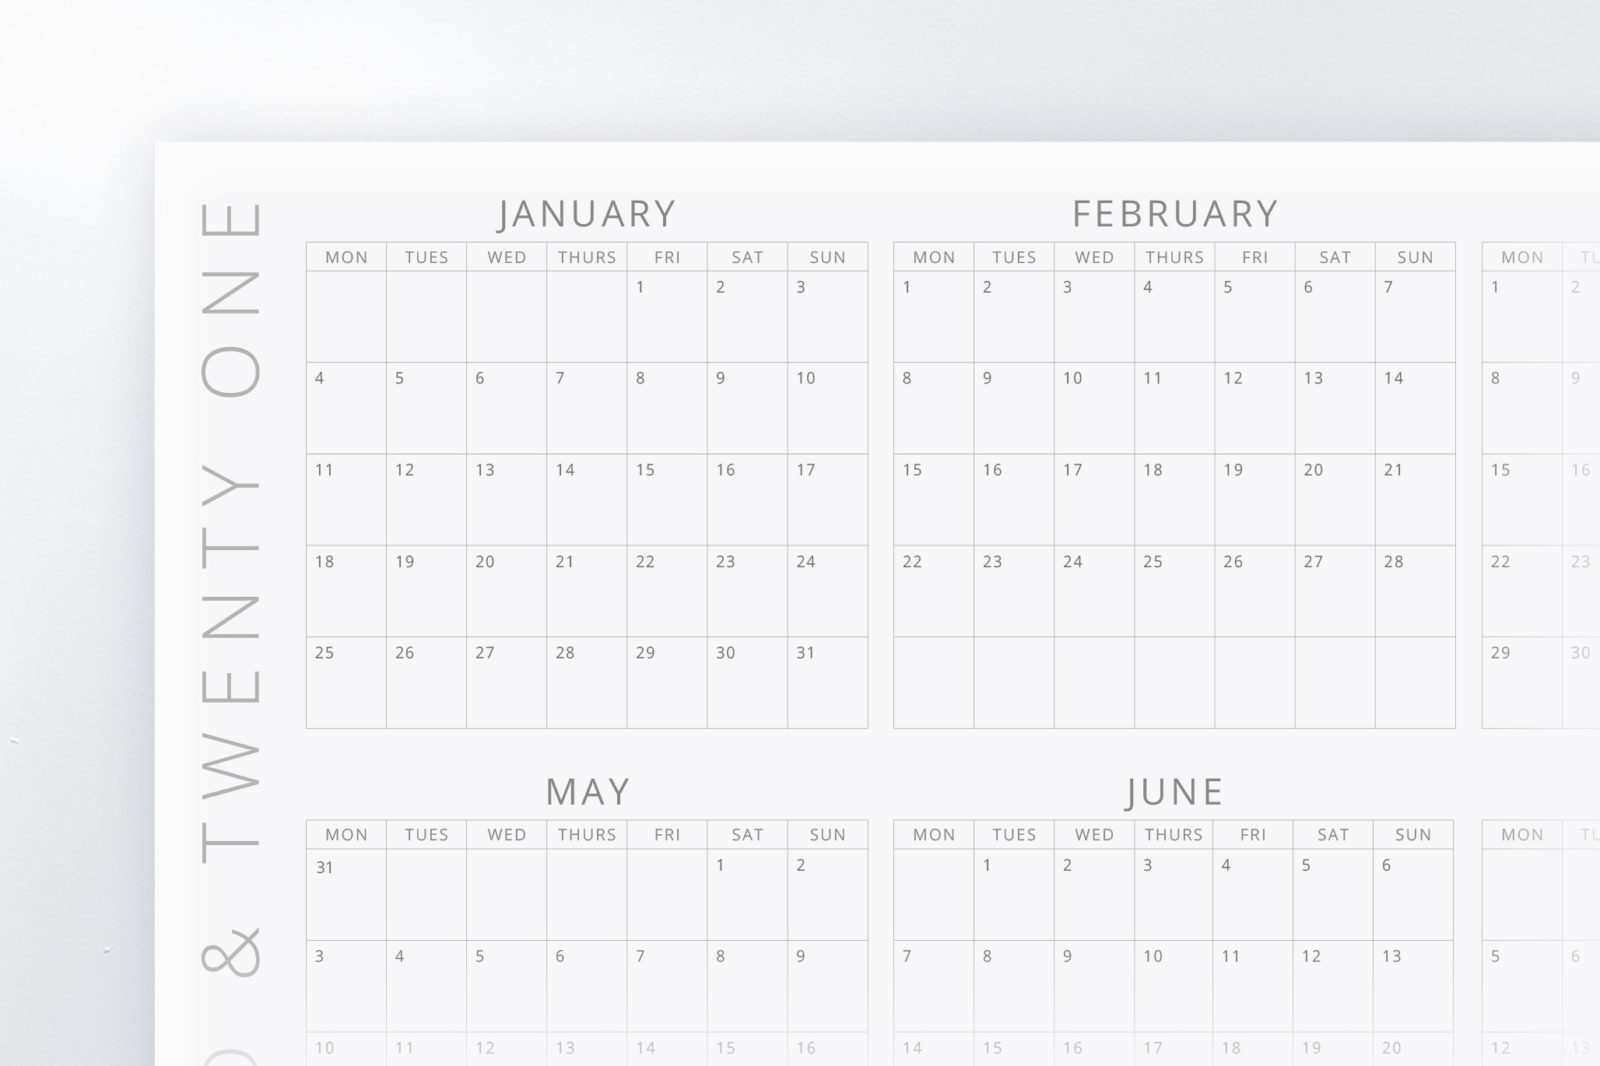 We describe the overall Calendar style as clean, simple, yet functional.